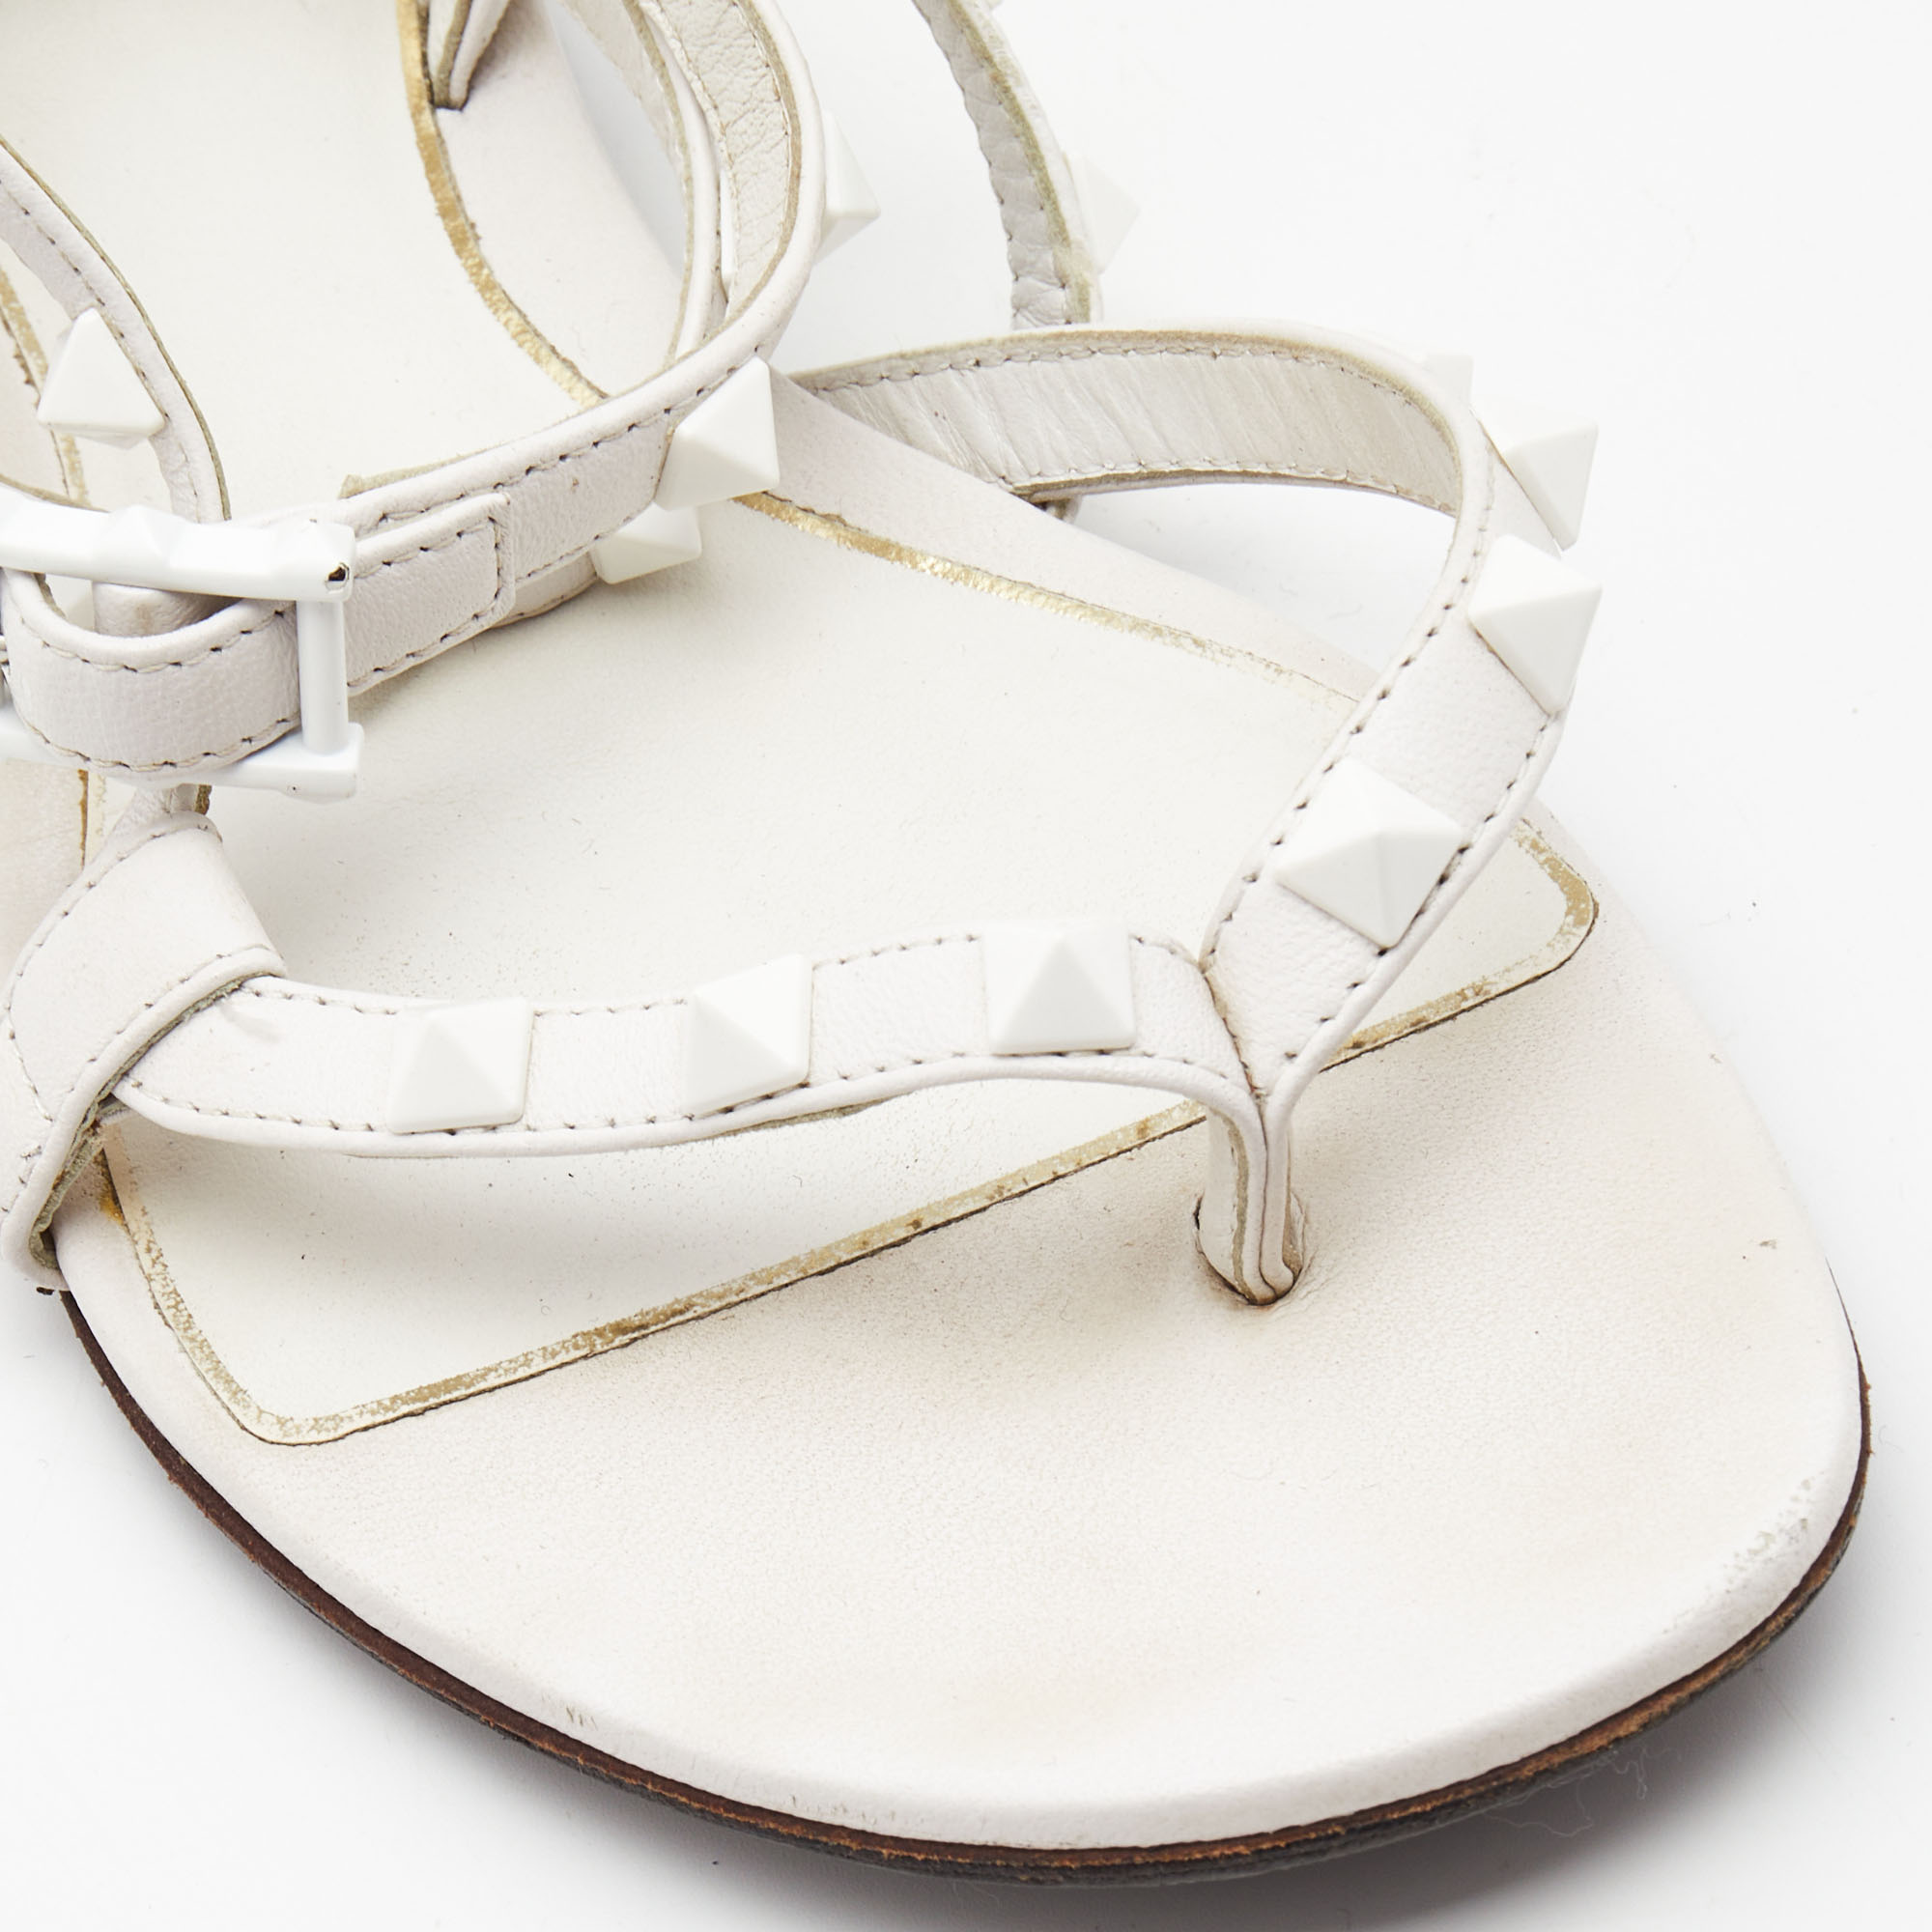 Valentino White Leather Rockstud Ankle Strap Flat Sandals Size 36